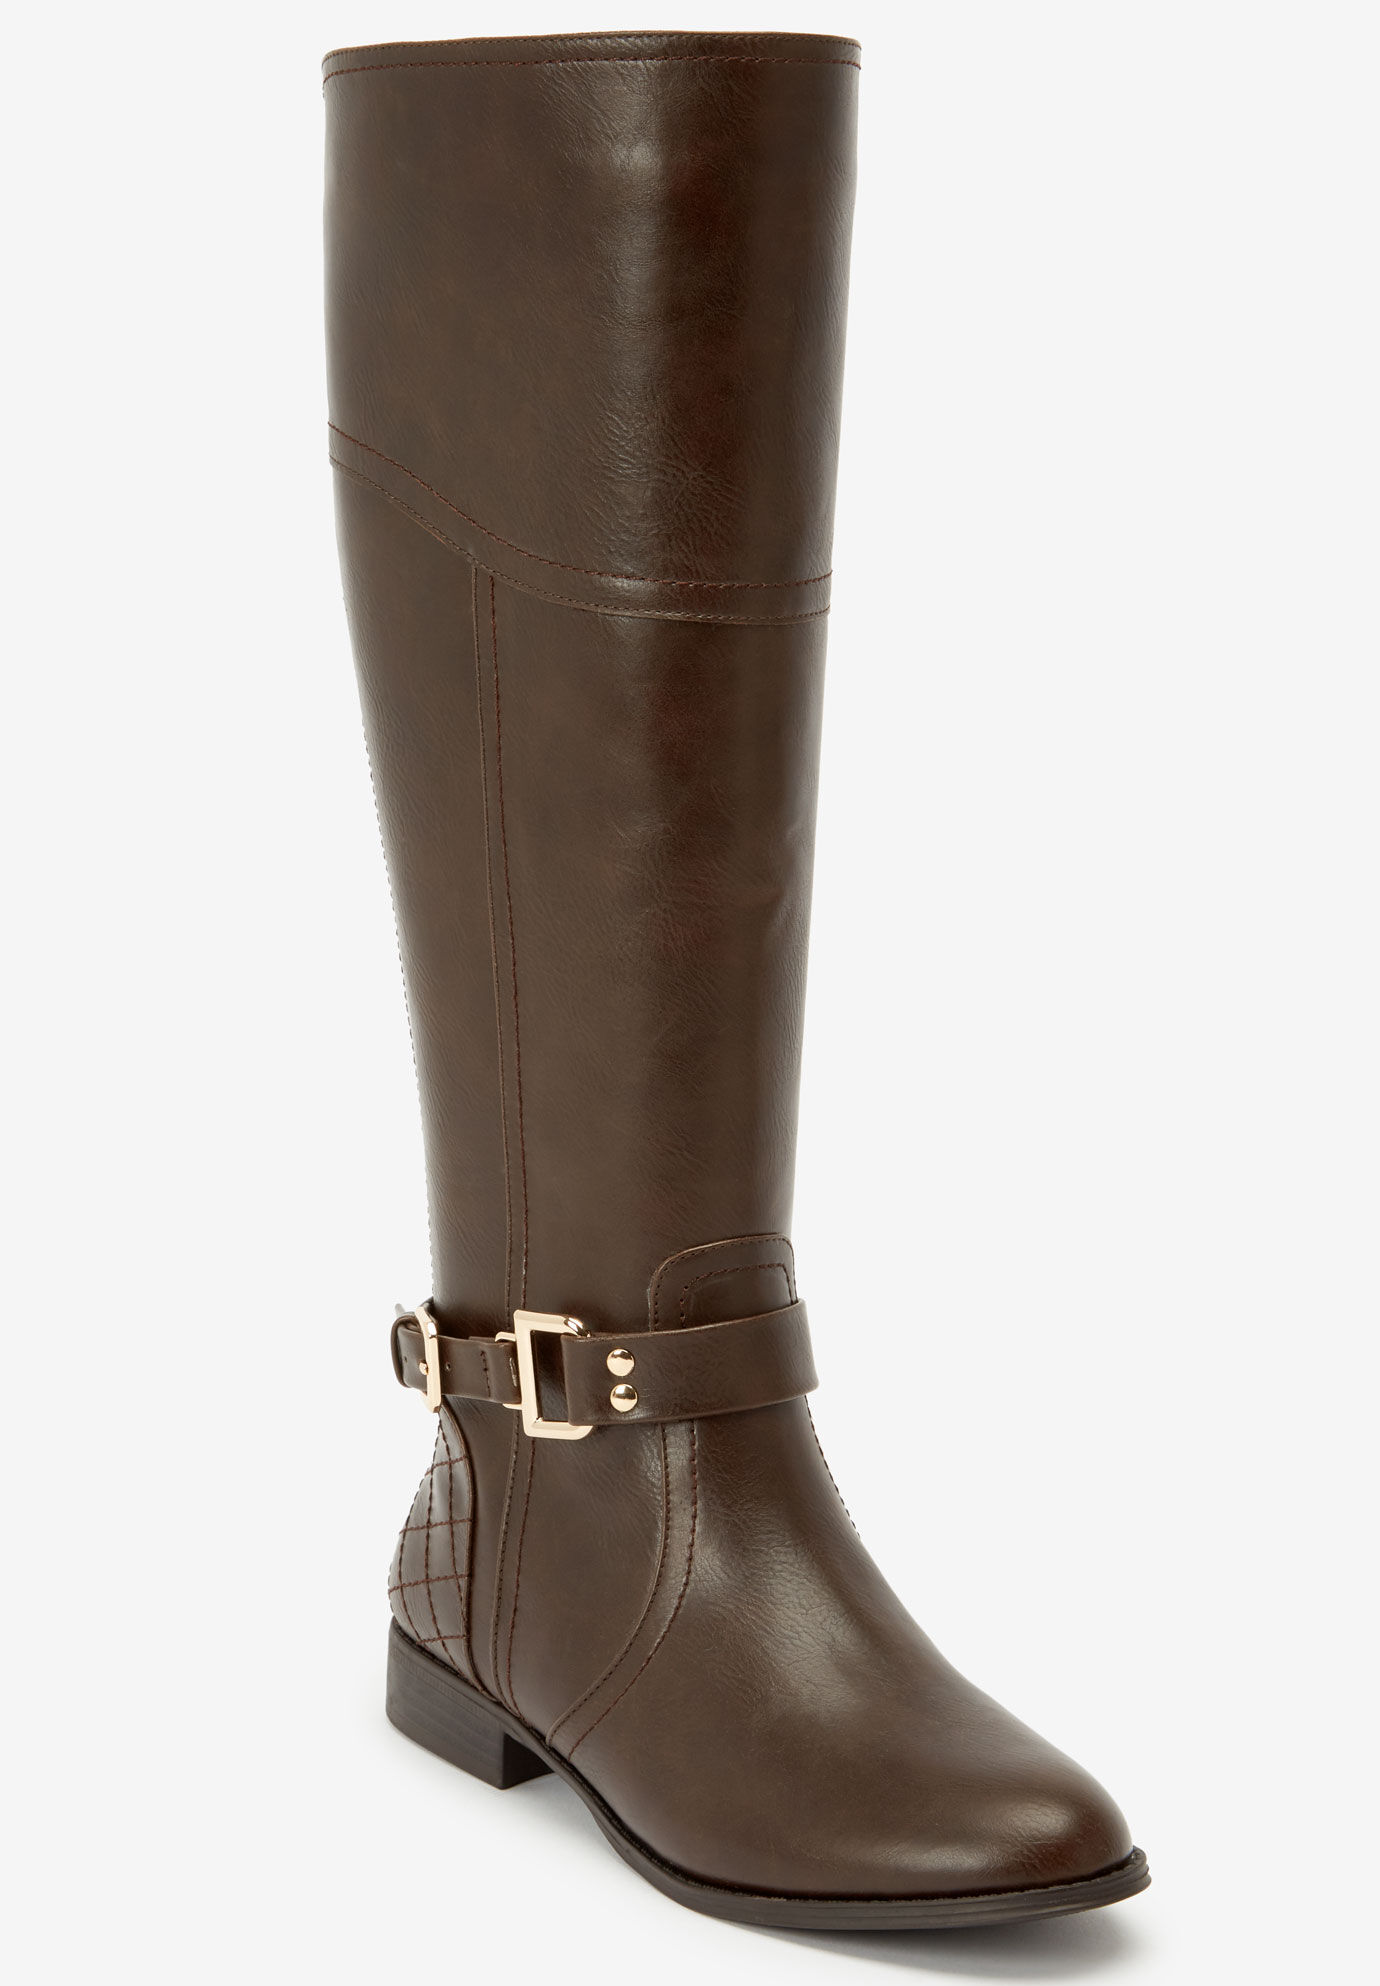 wide calf boots clearance